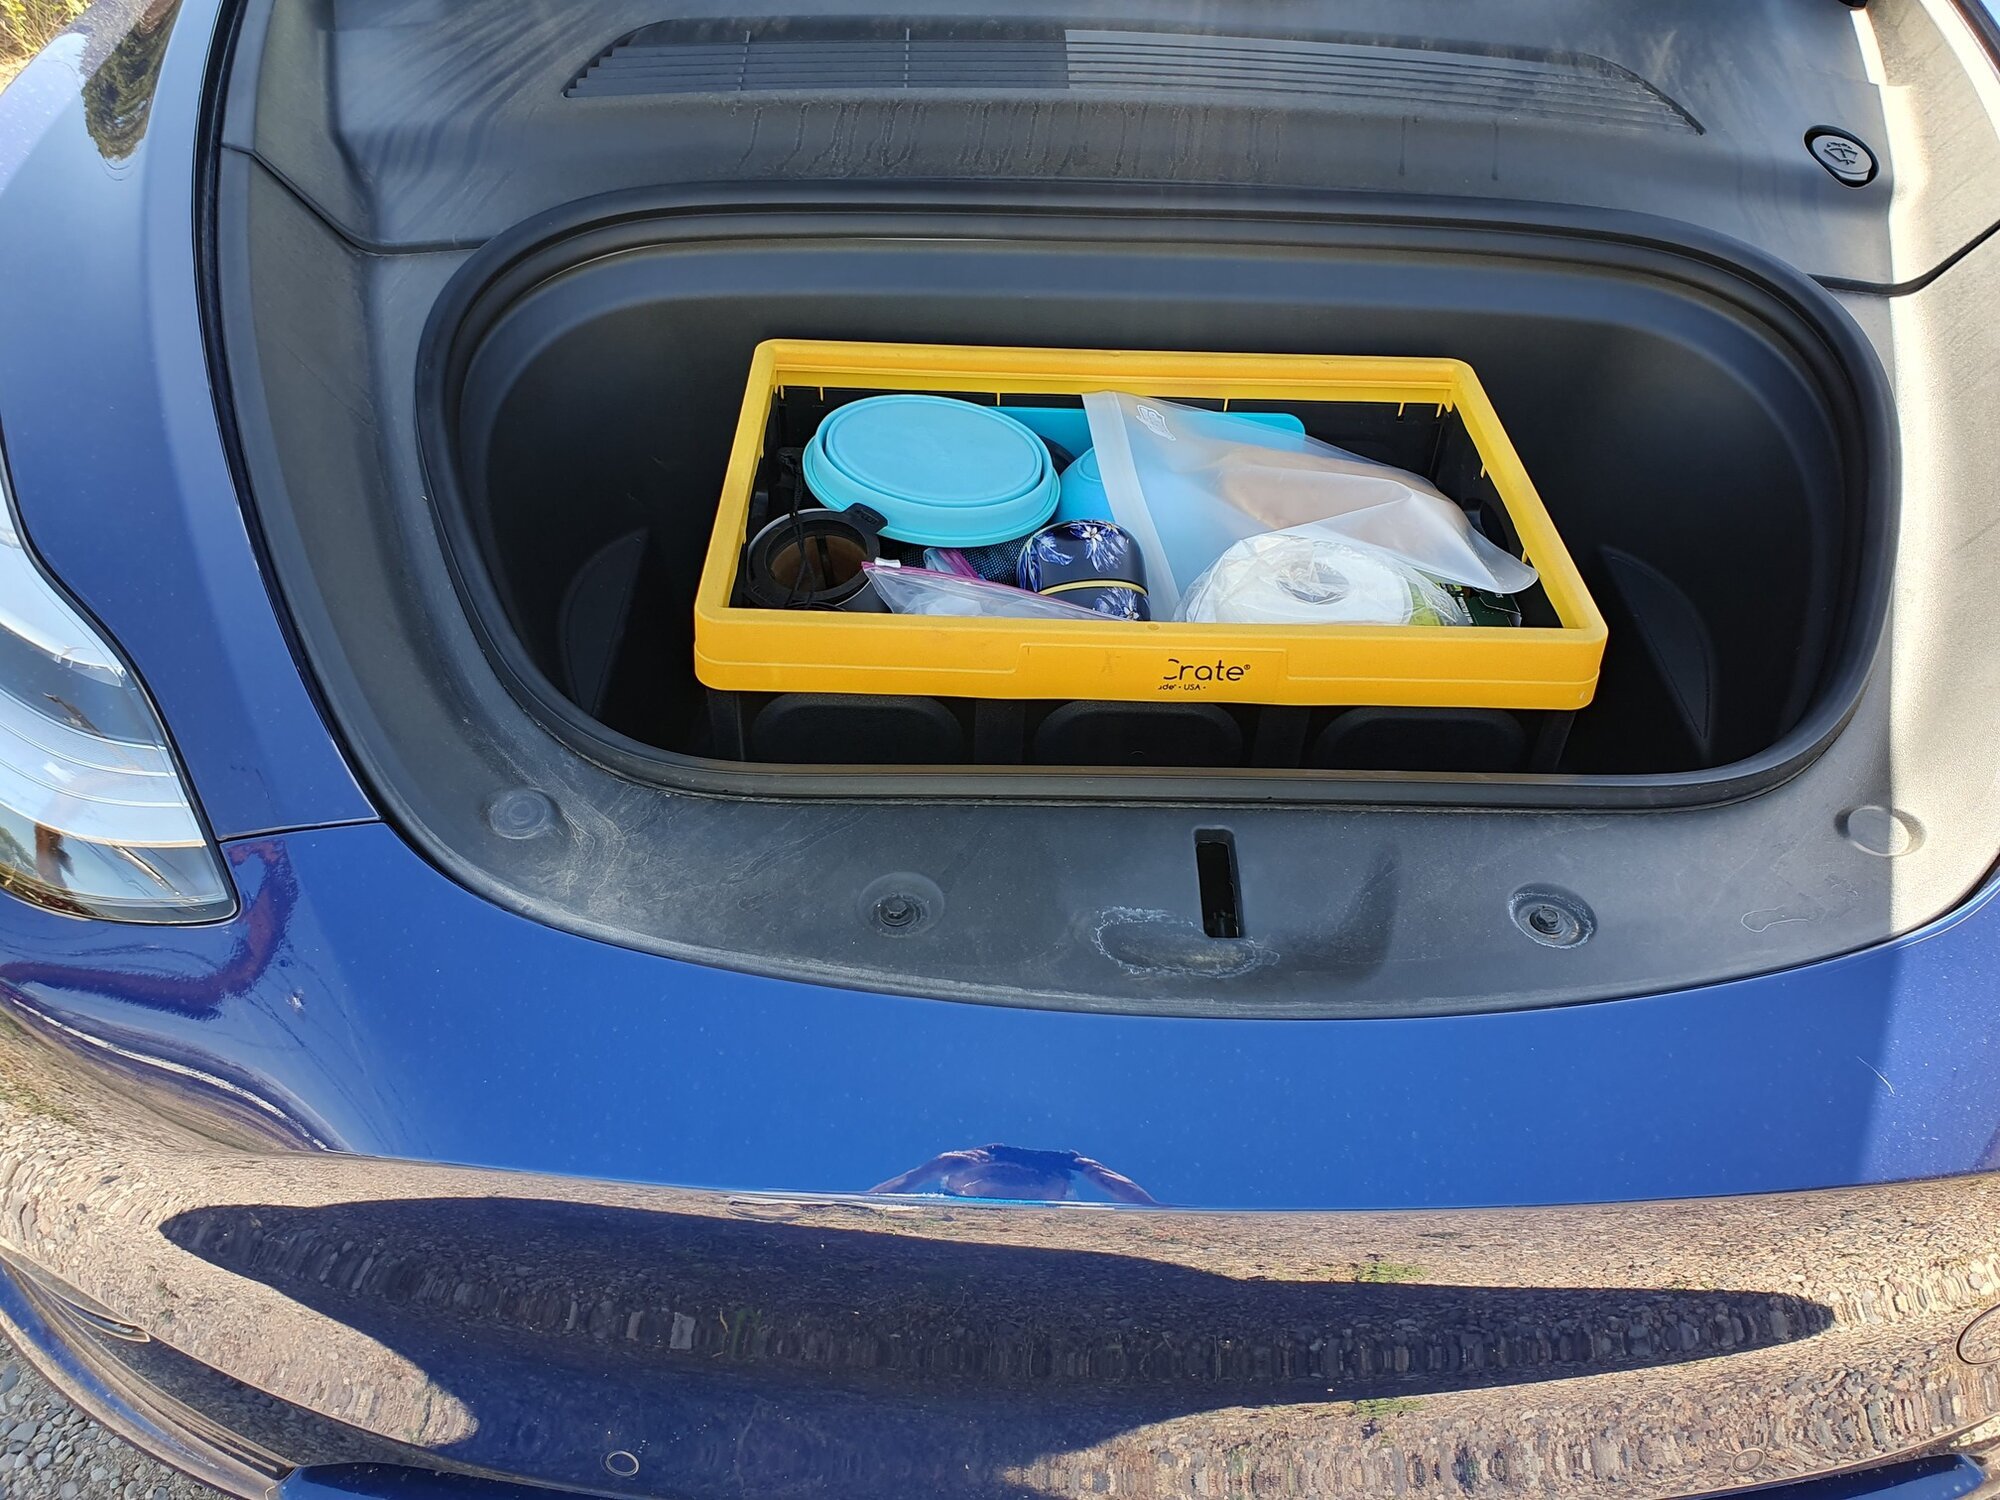 Tesloid's Frunk Cooler for Model Y and Model 3 is a must-have for